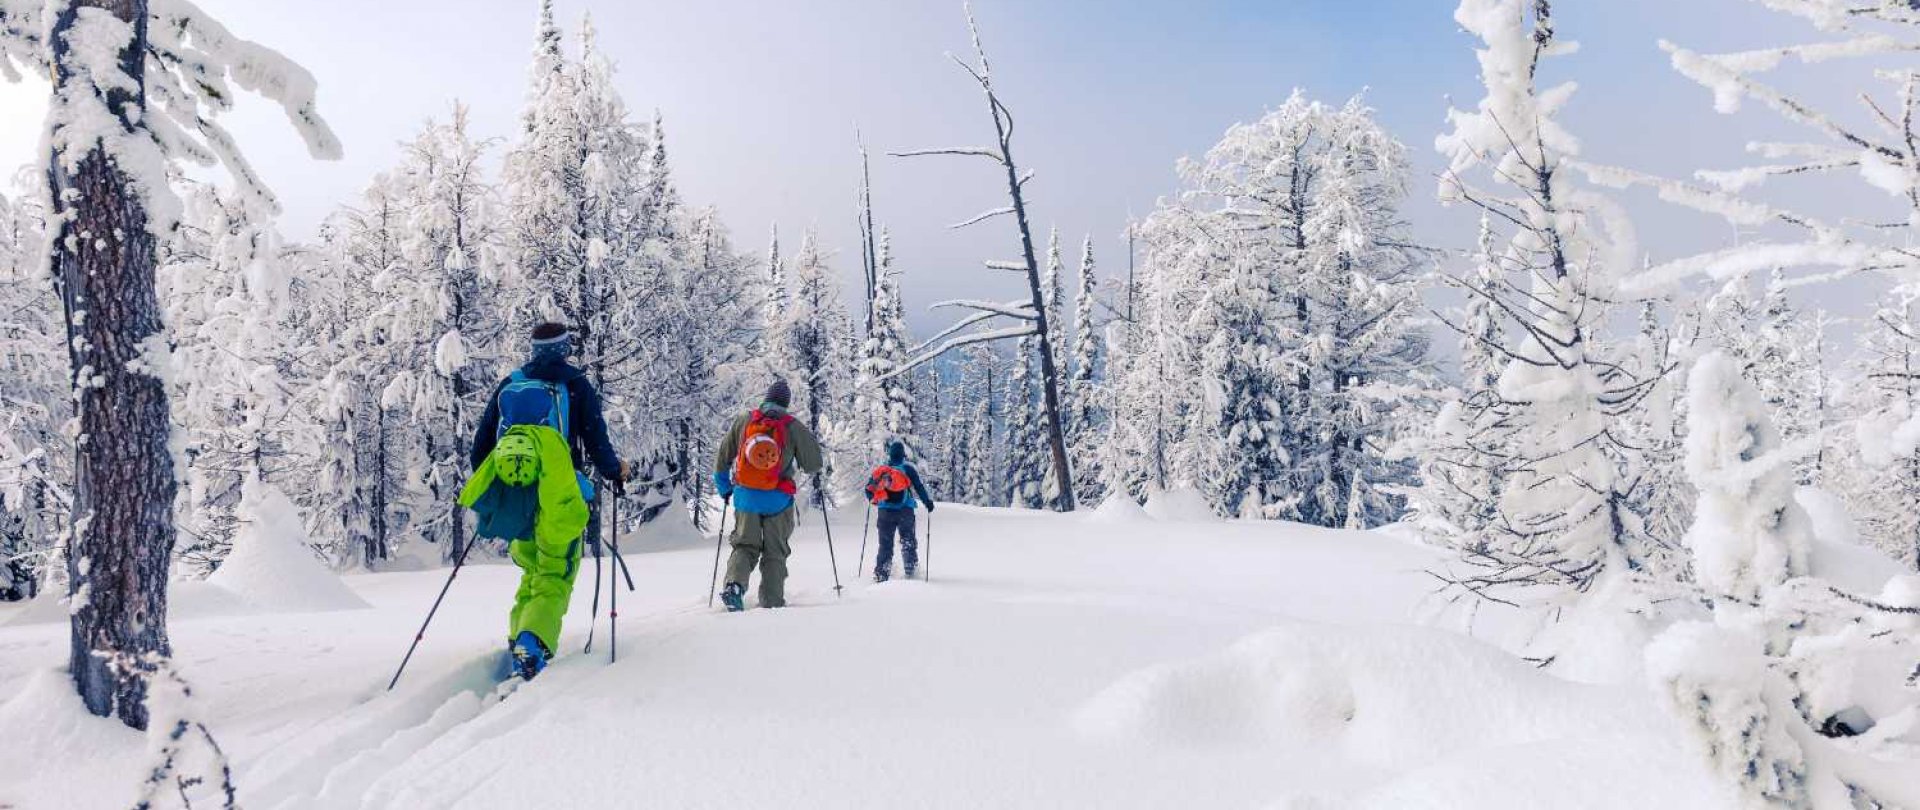 Skitouring in Wisła, or how to start your adventure with ski touring